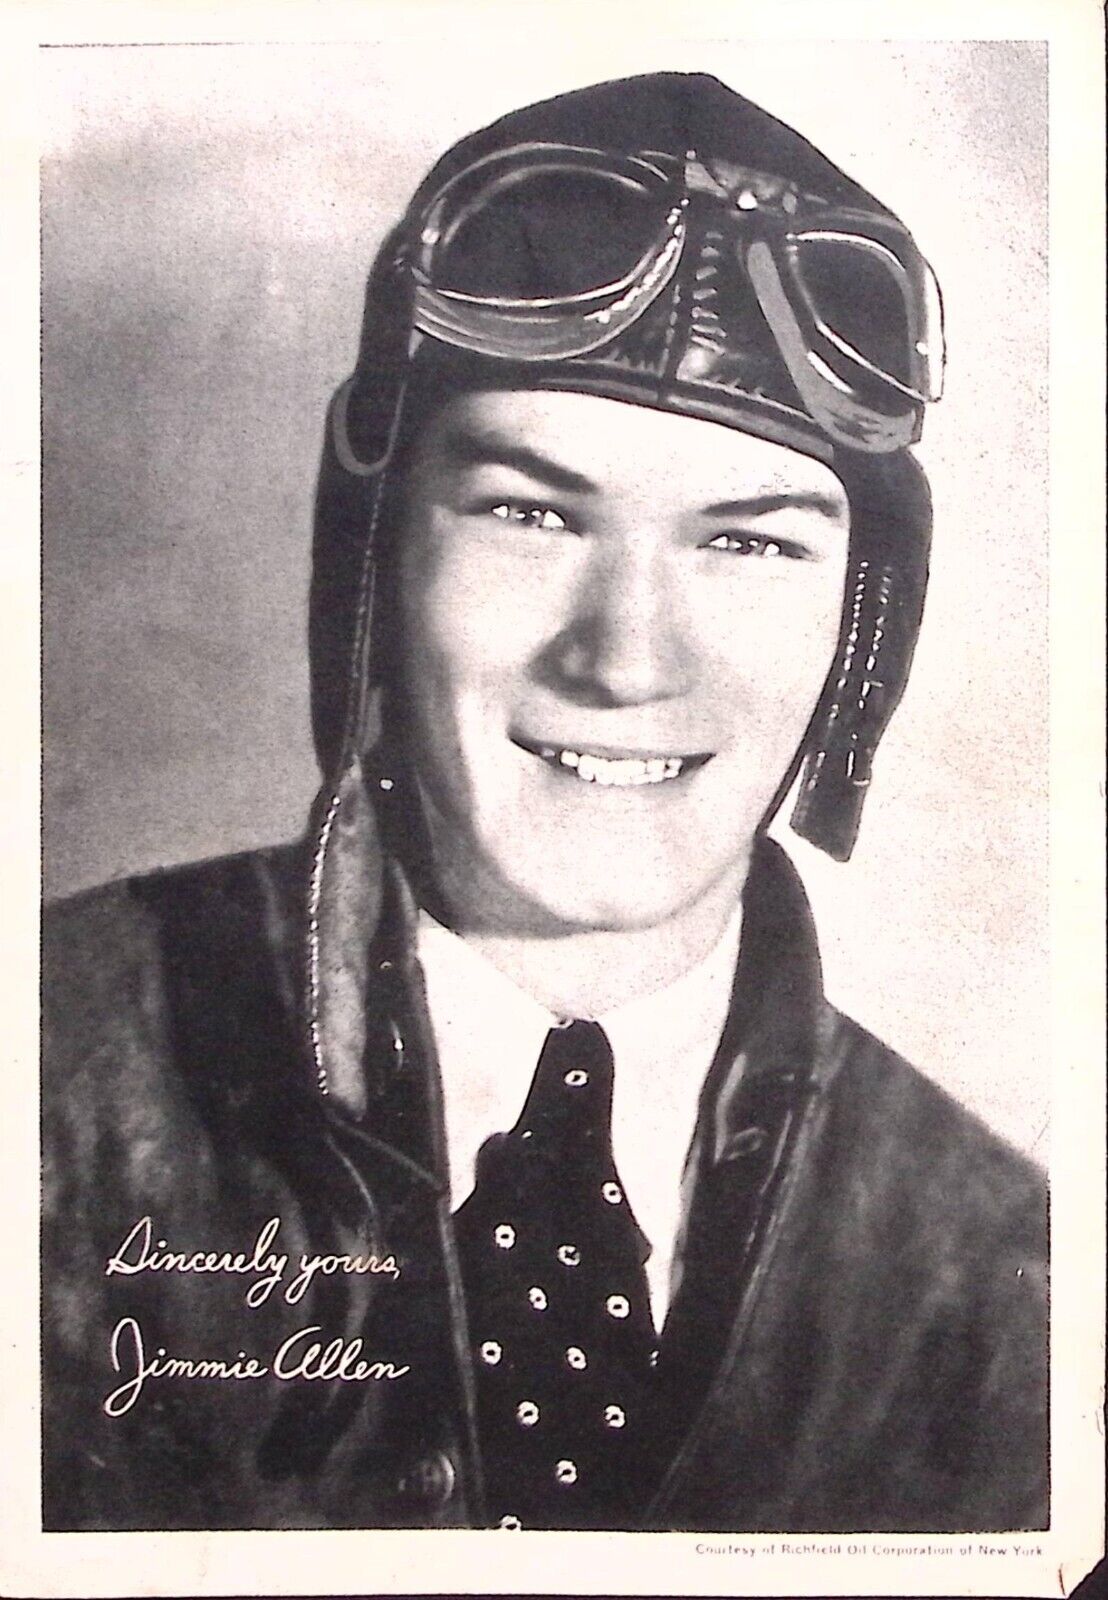 1930S AIR ADVENTURES OF JIMMIE ALLEN PRINT, COURTESY OF RICHFIELD OIL CORP  Z214